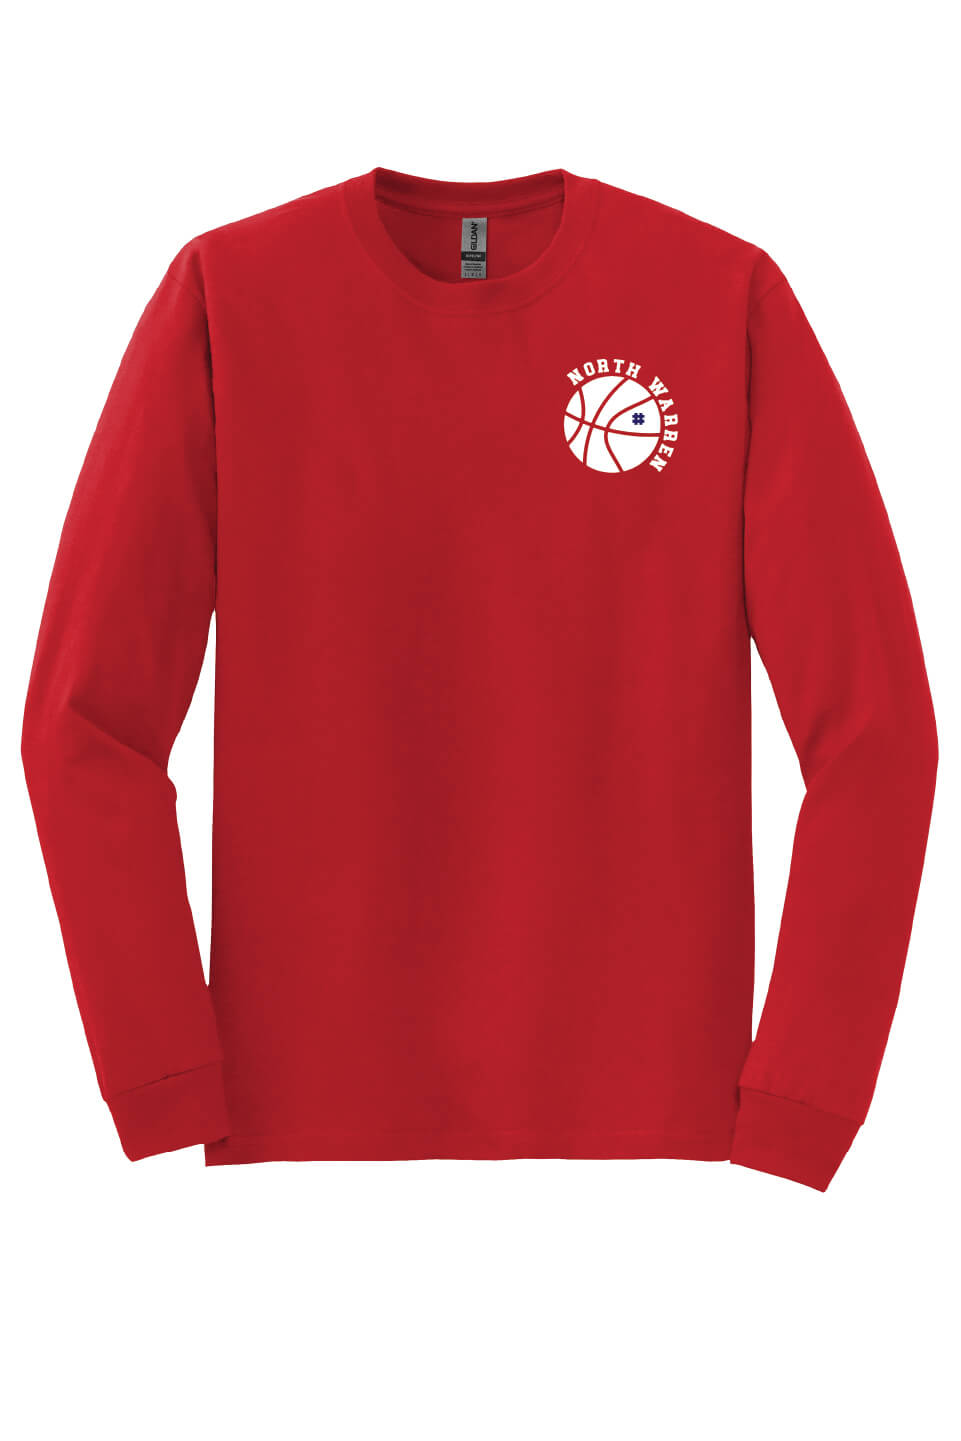 North Warren Basketball Long Sleeve T-Shirt (Youth) red